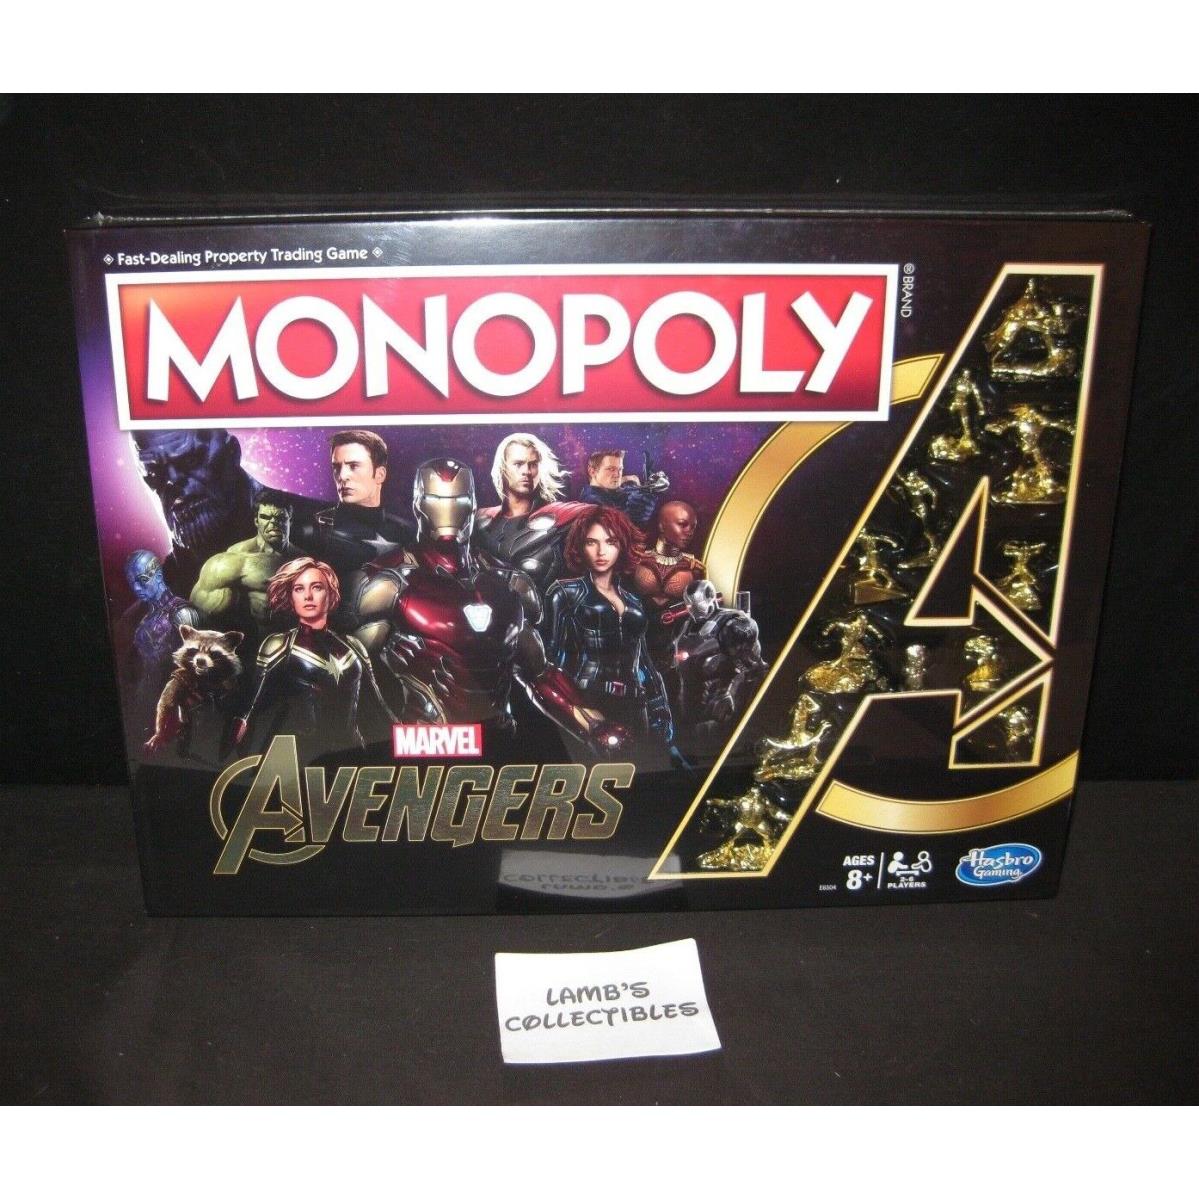 Marvel Avengers Endgame Monopoly Special Edition Board Game Gold Color Pieces